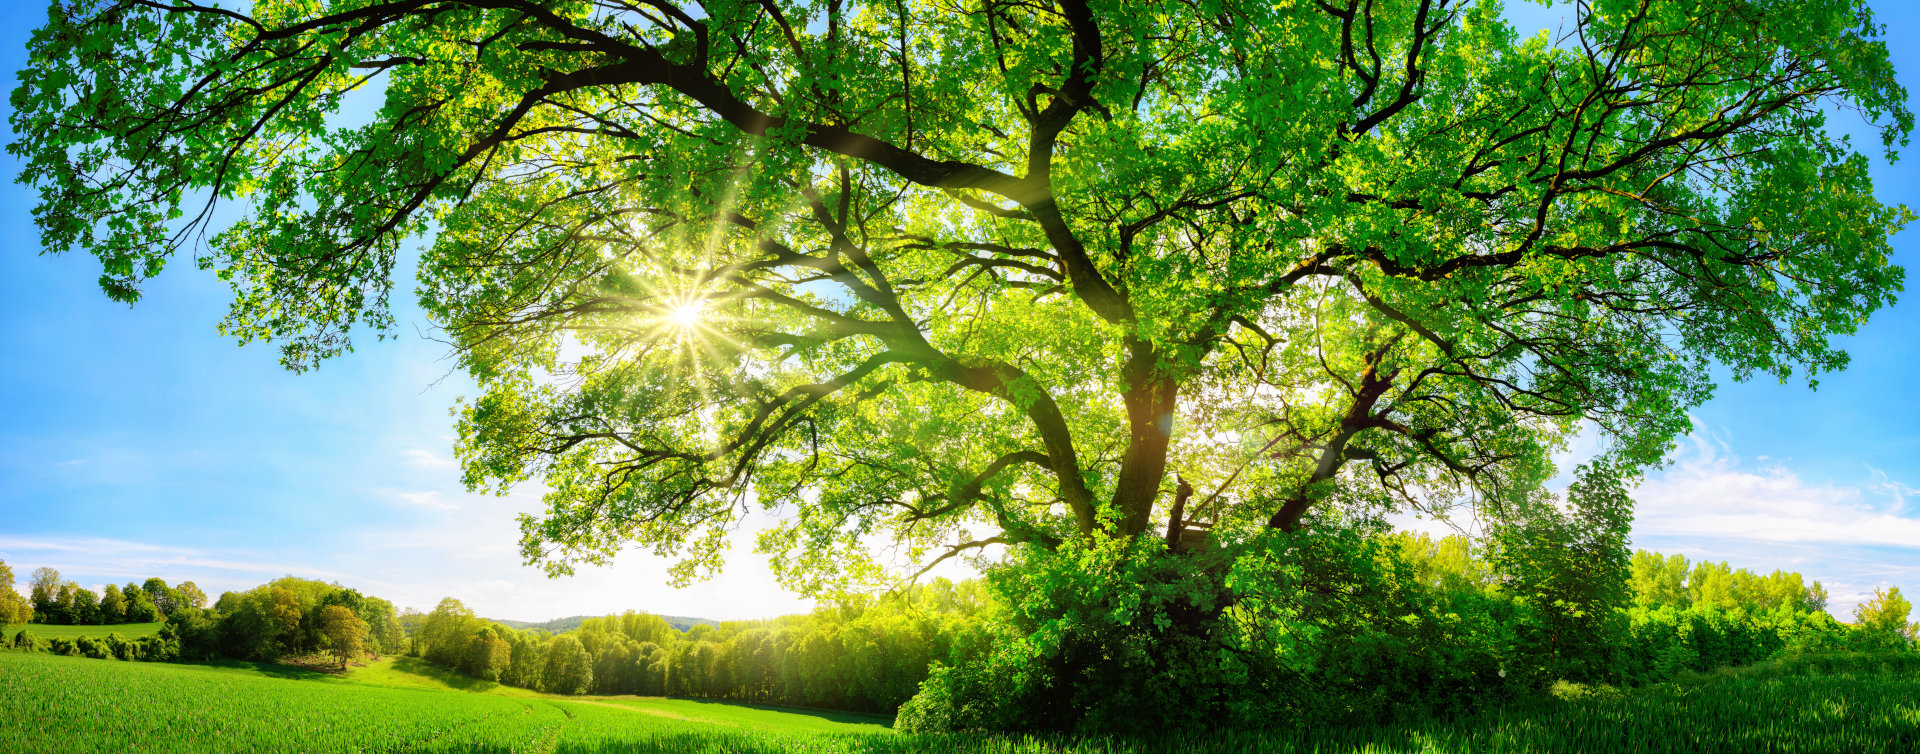 Going the extra (leafy) mile: We're planting 2 trees for every new virtual server